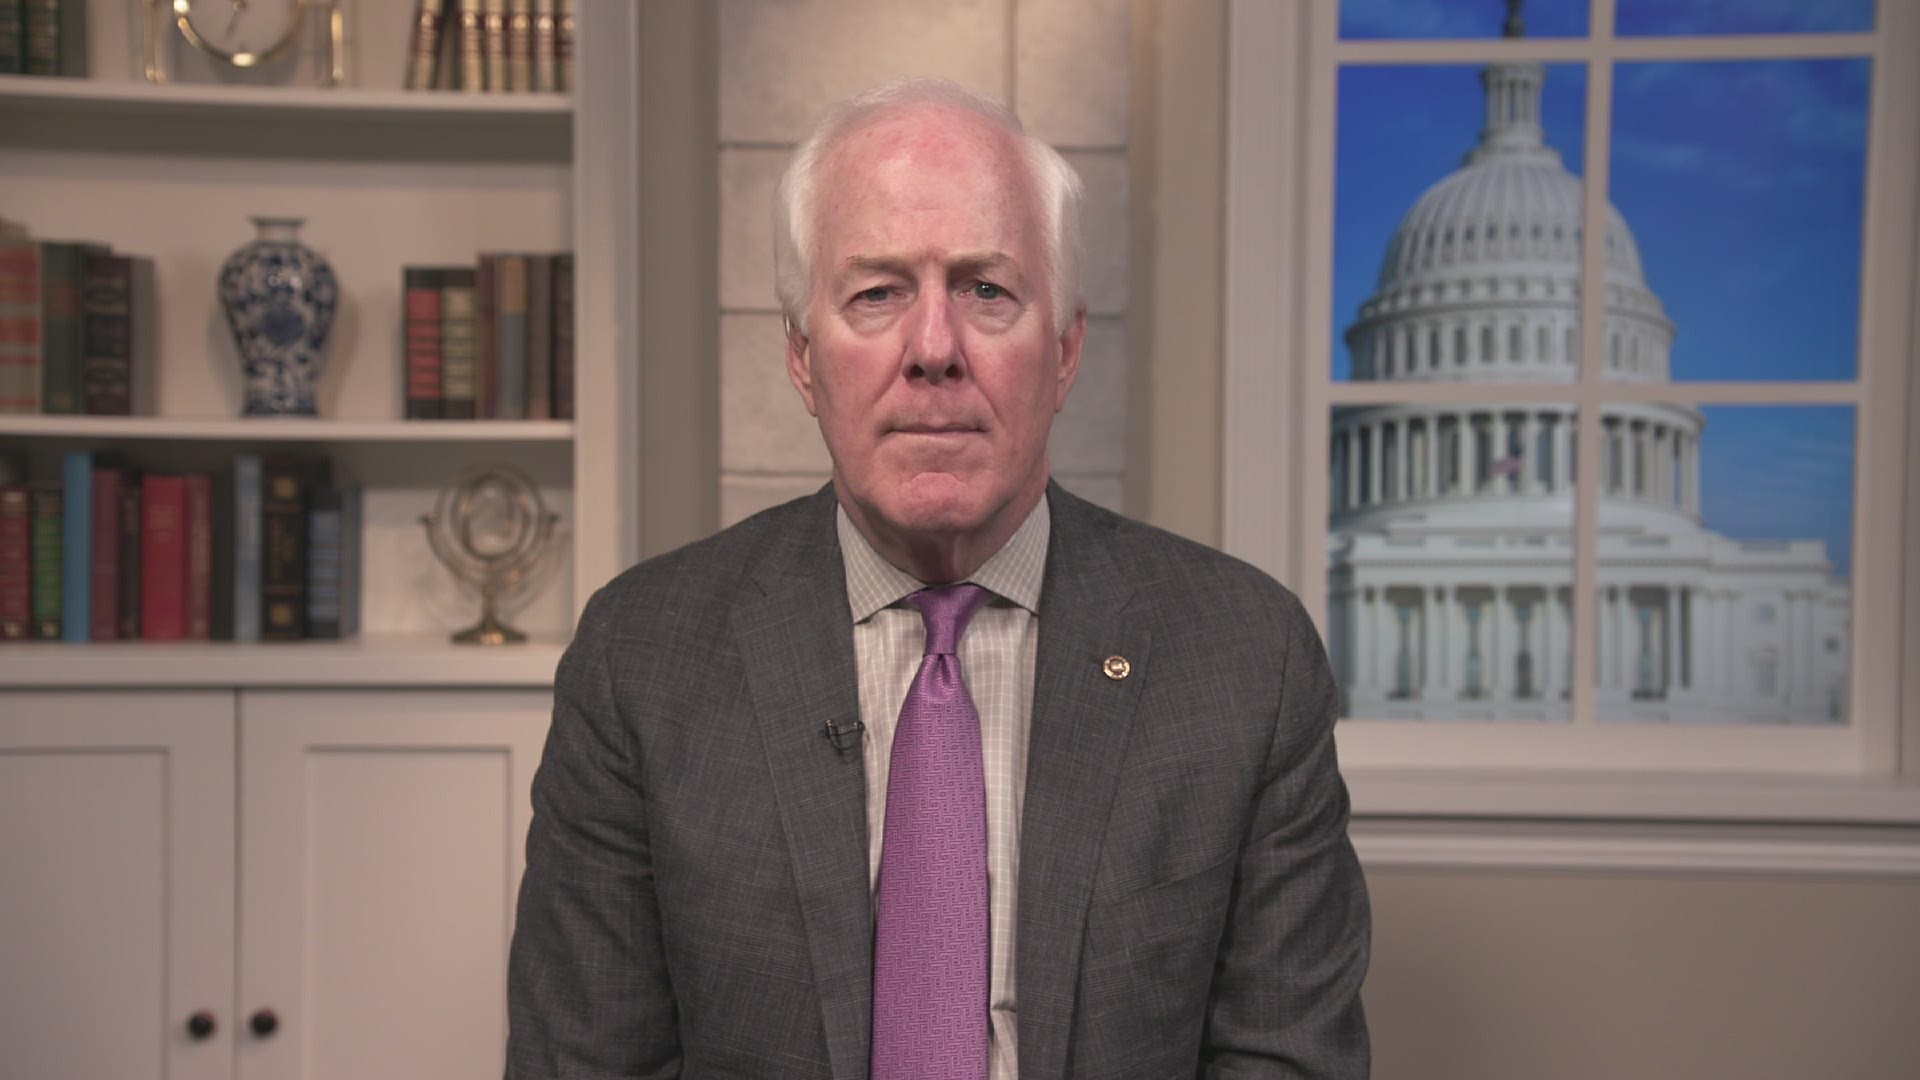 Sen. Cornyn hosted a call on Thursday, 7-15, about Texas Democrats leaving the state.